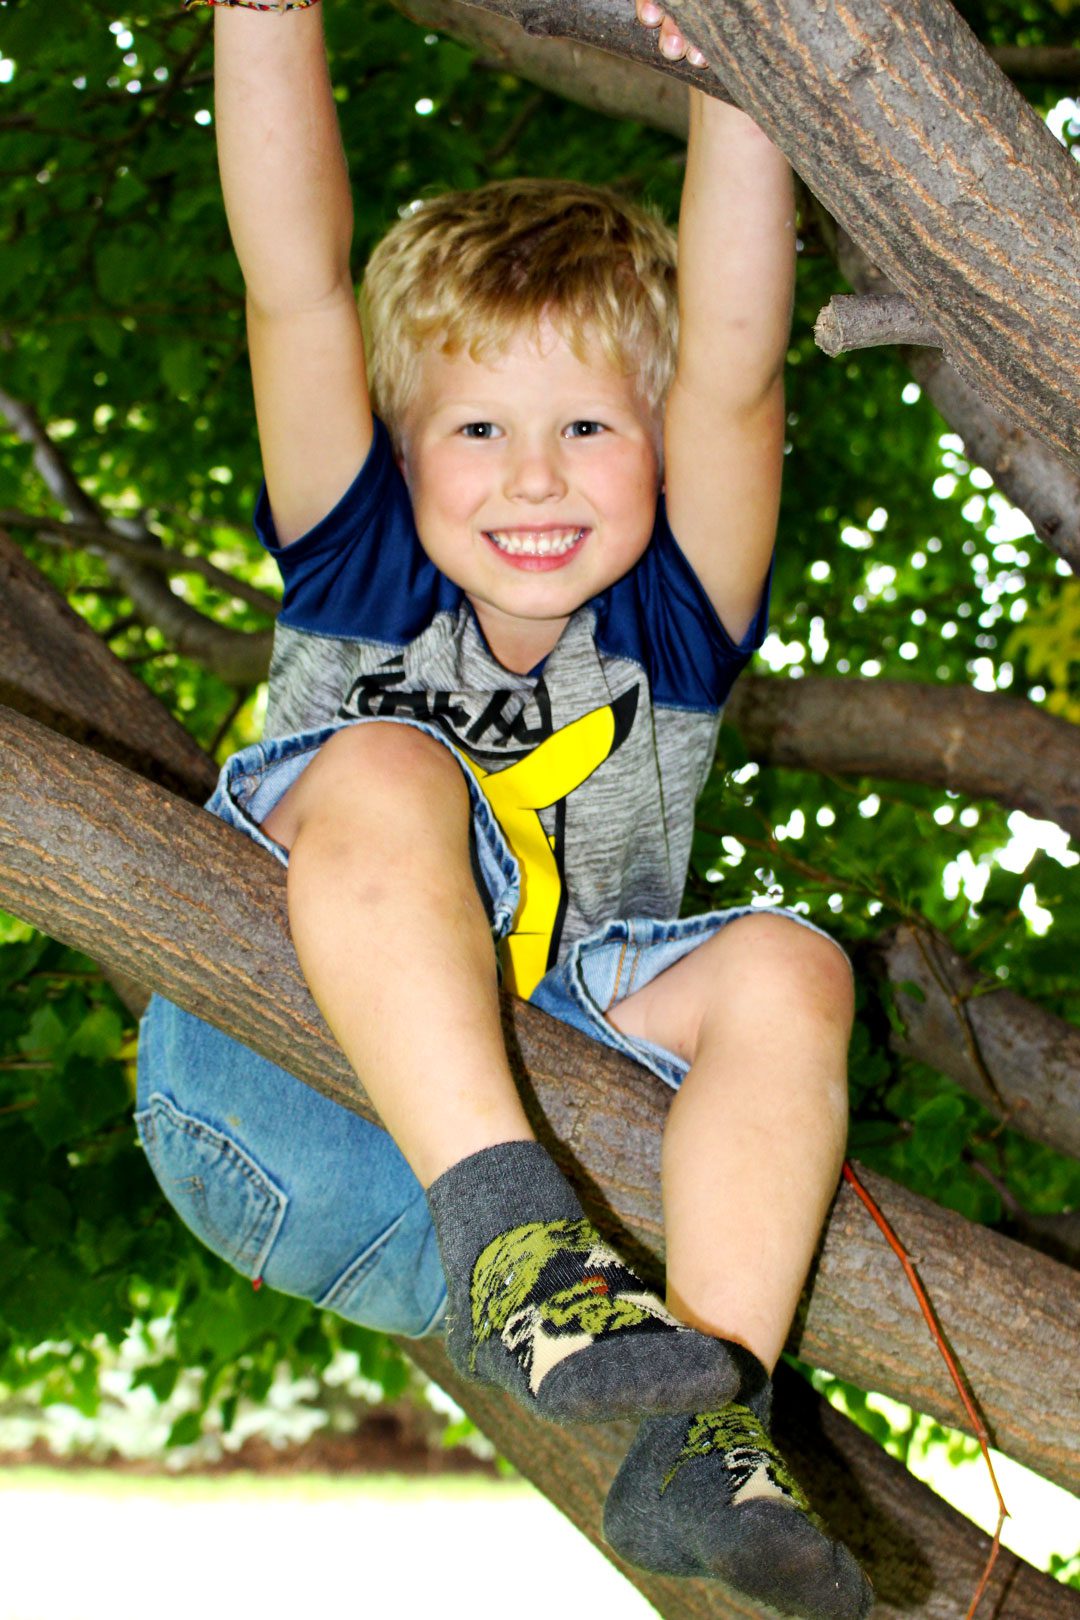 A smiling boy with blonde hair climbing a tree.